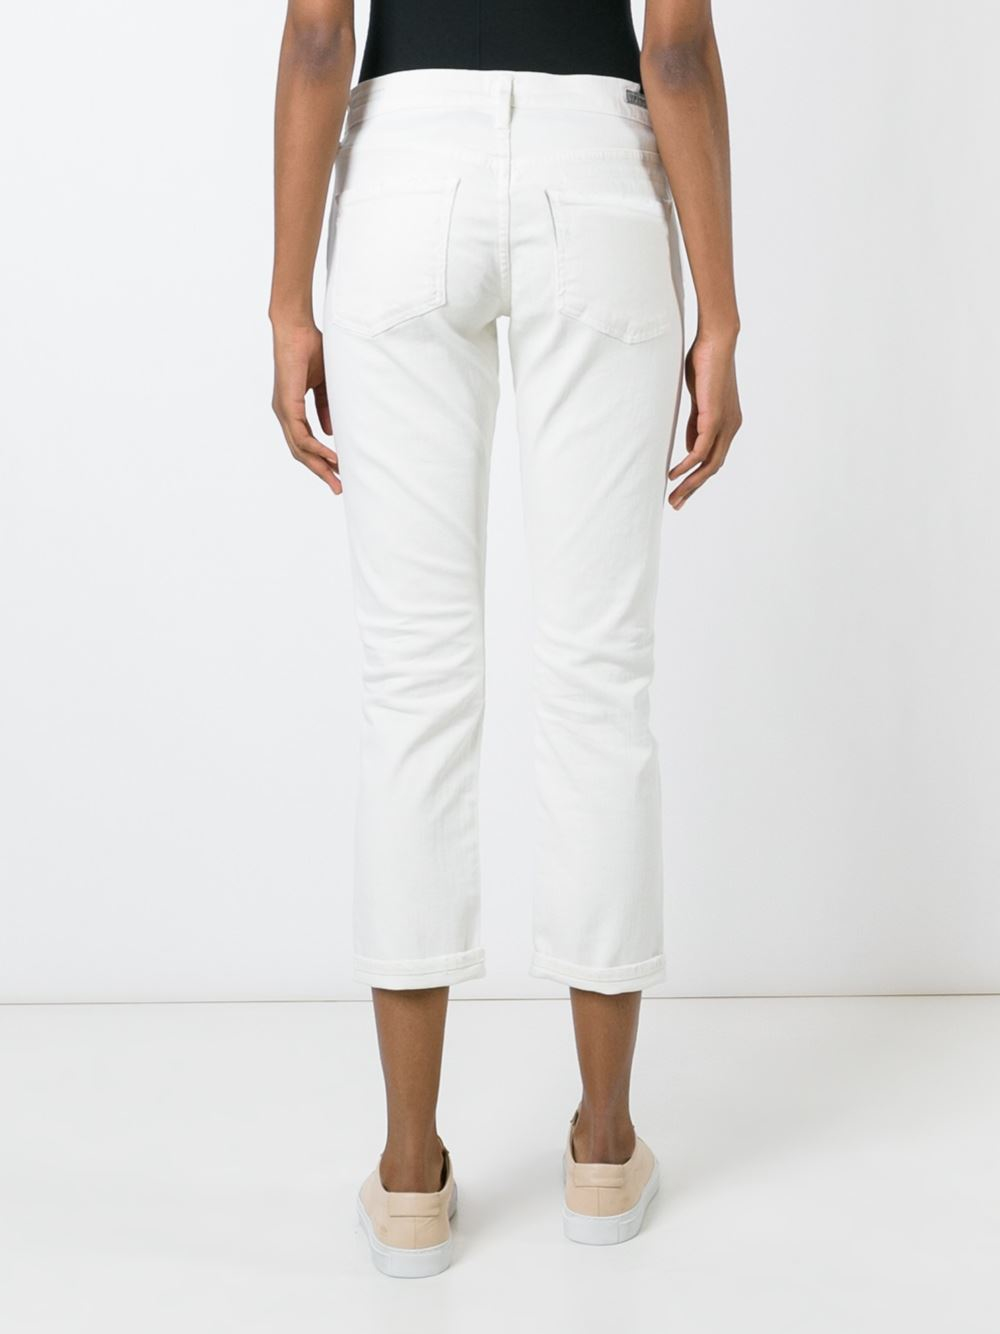 Citizens of humanity Cropped Jeans in White | Lyst